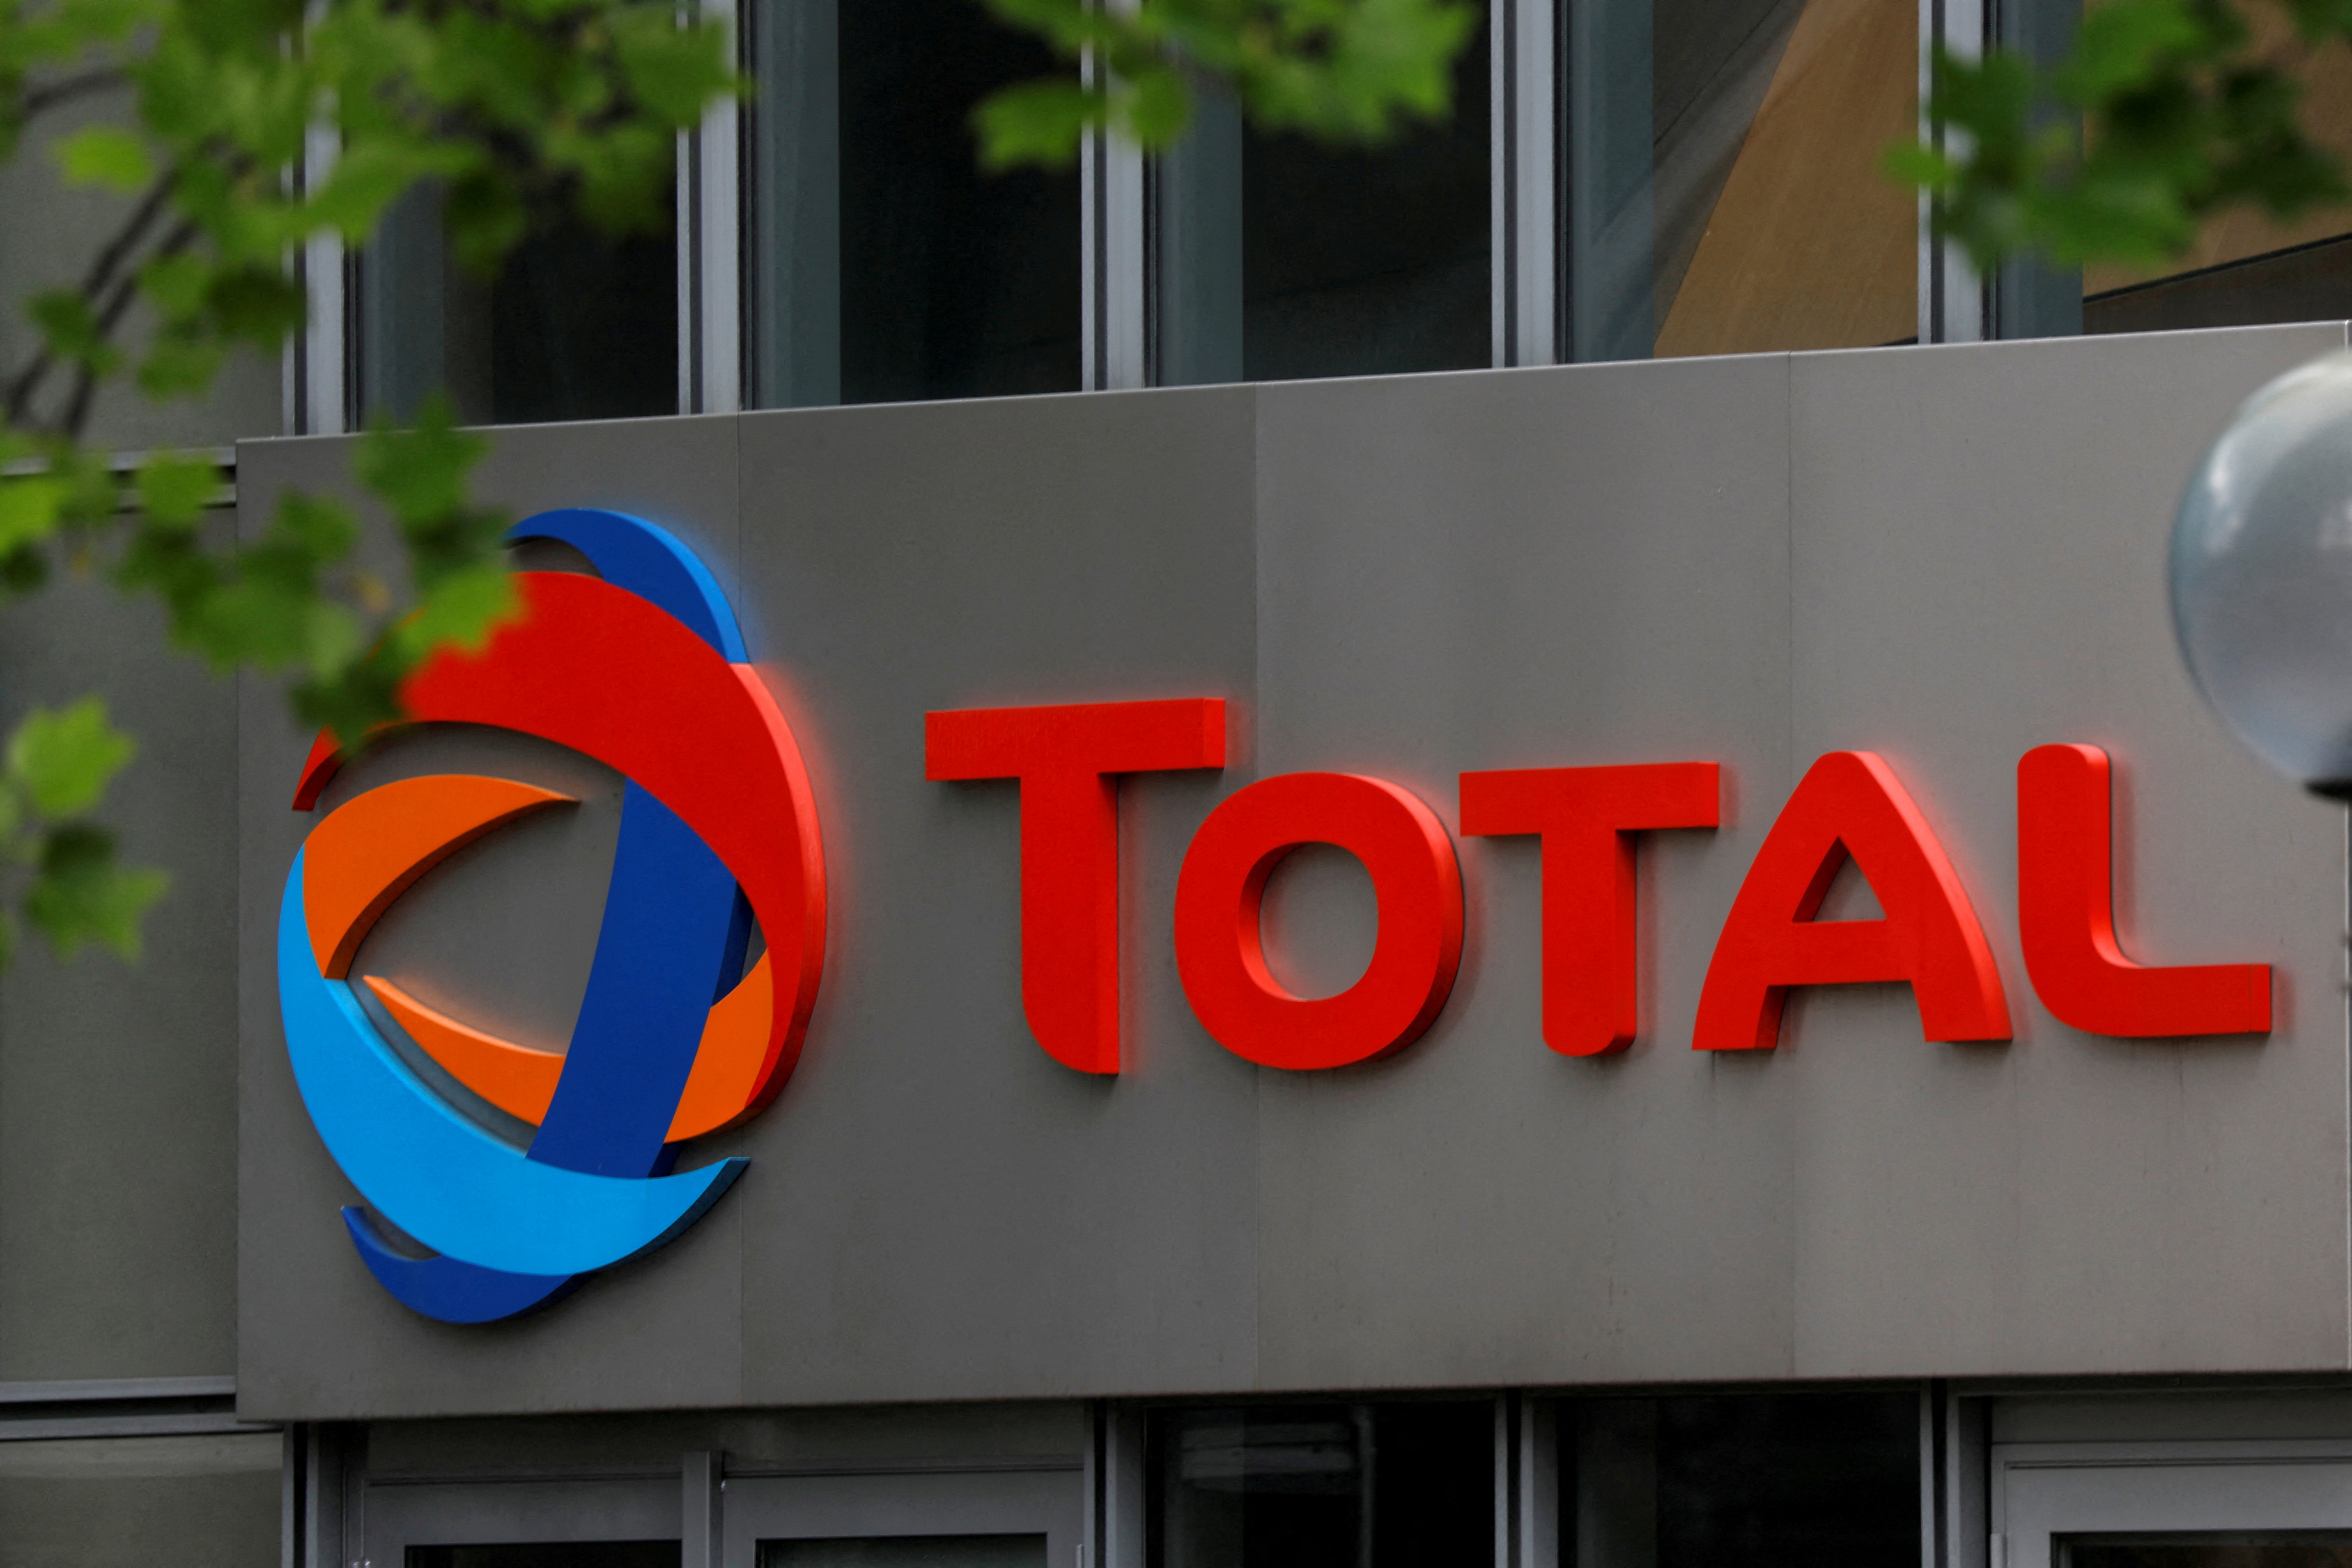 The logo of French oil giant Total is seen at La Defense business and financial district in Courbevoie